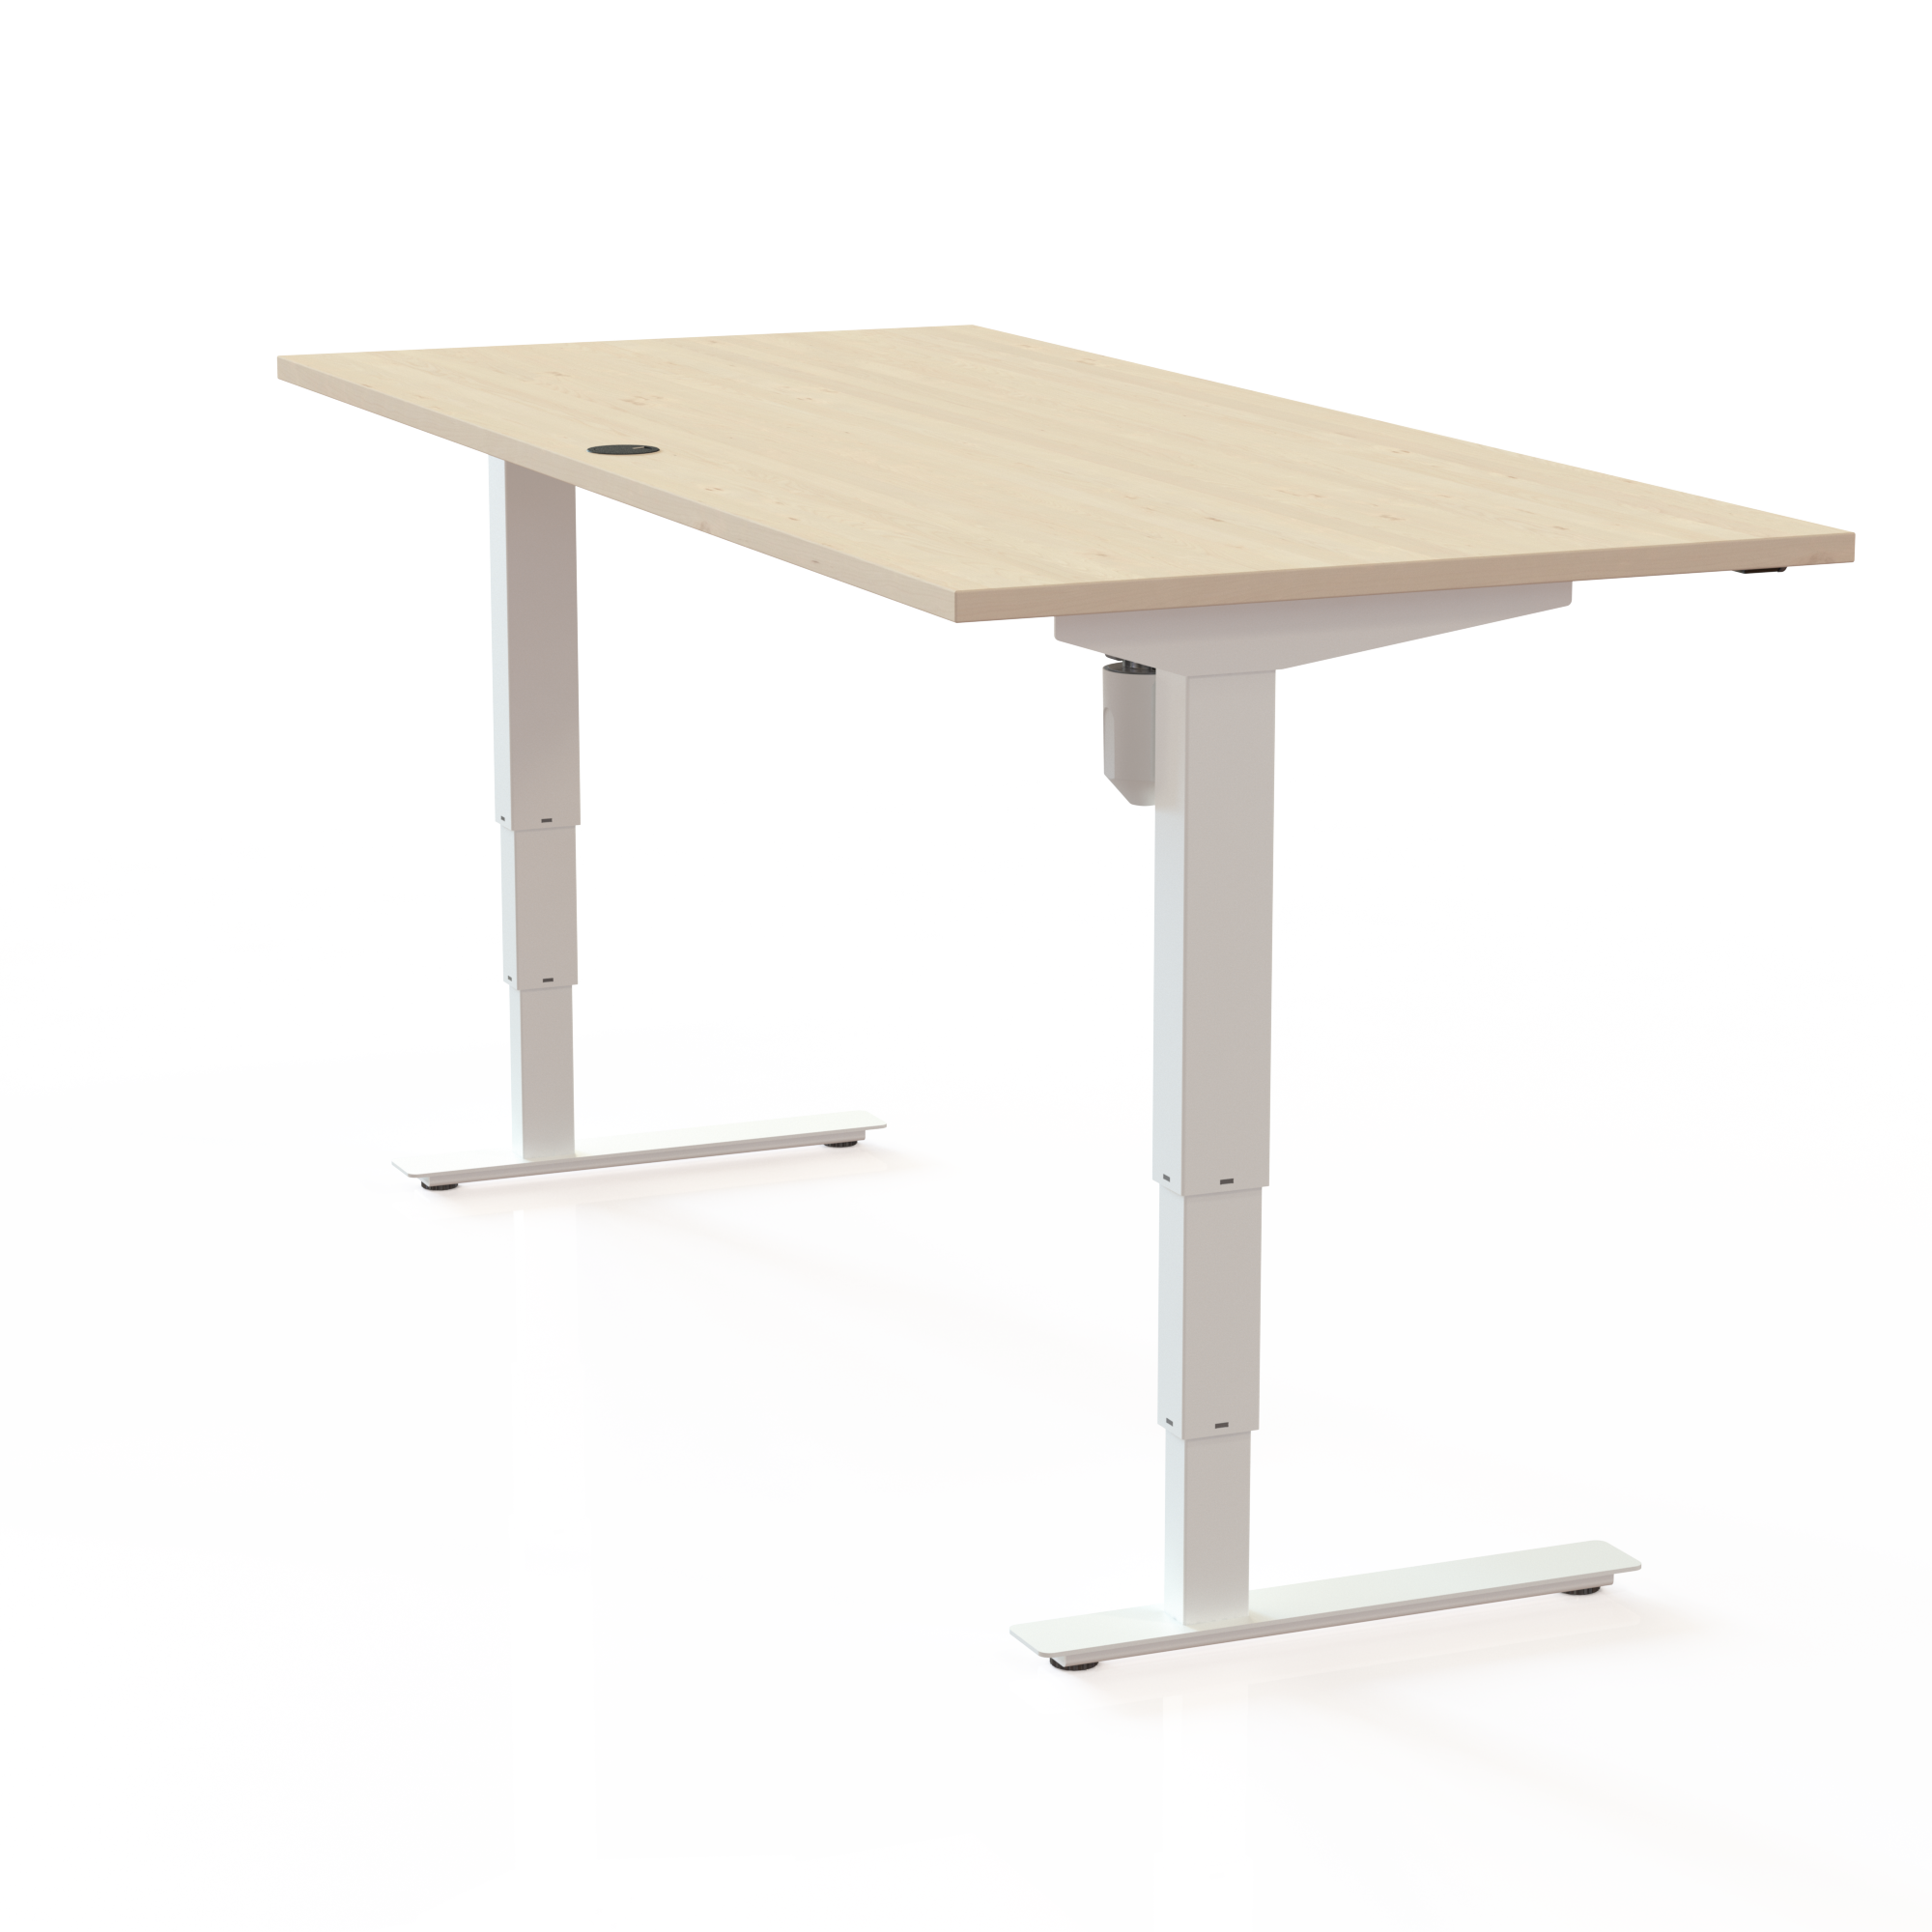 Electric Adjustable Desk | 180x80 cm | Maple with white frame